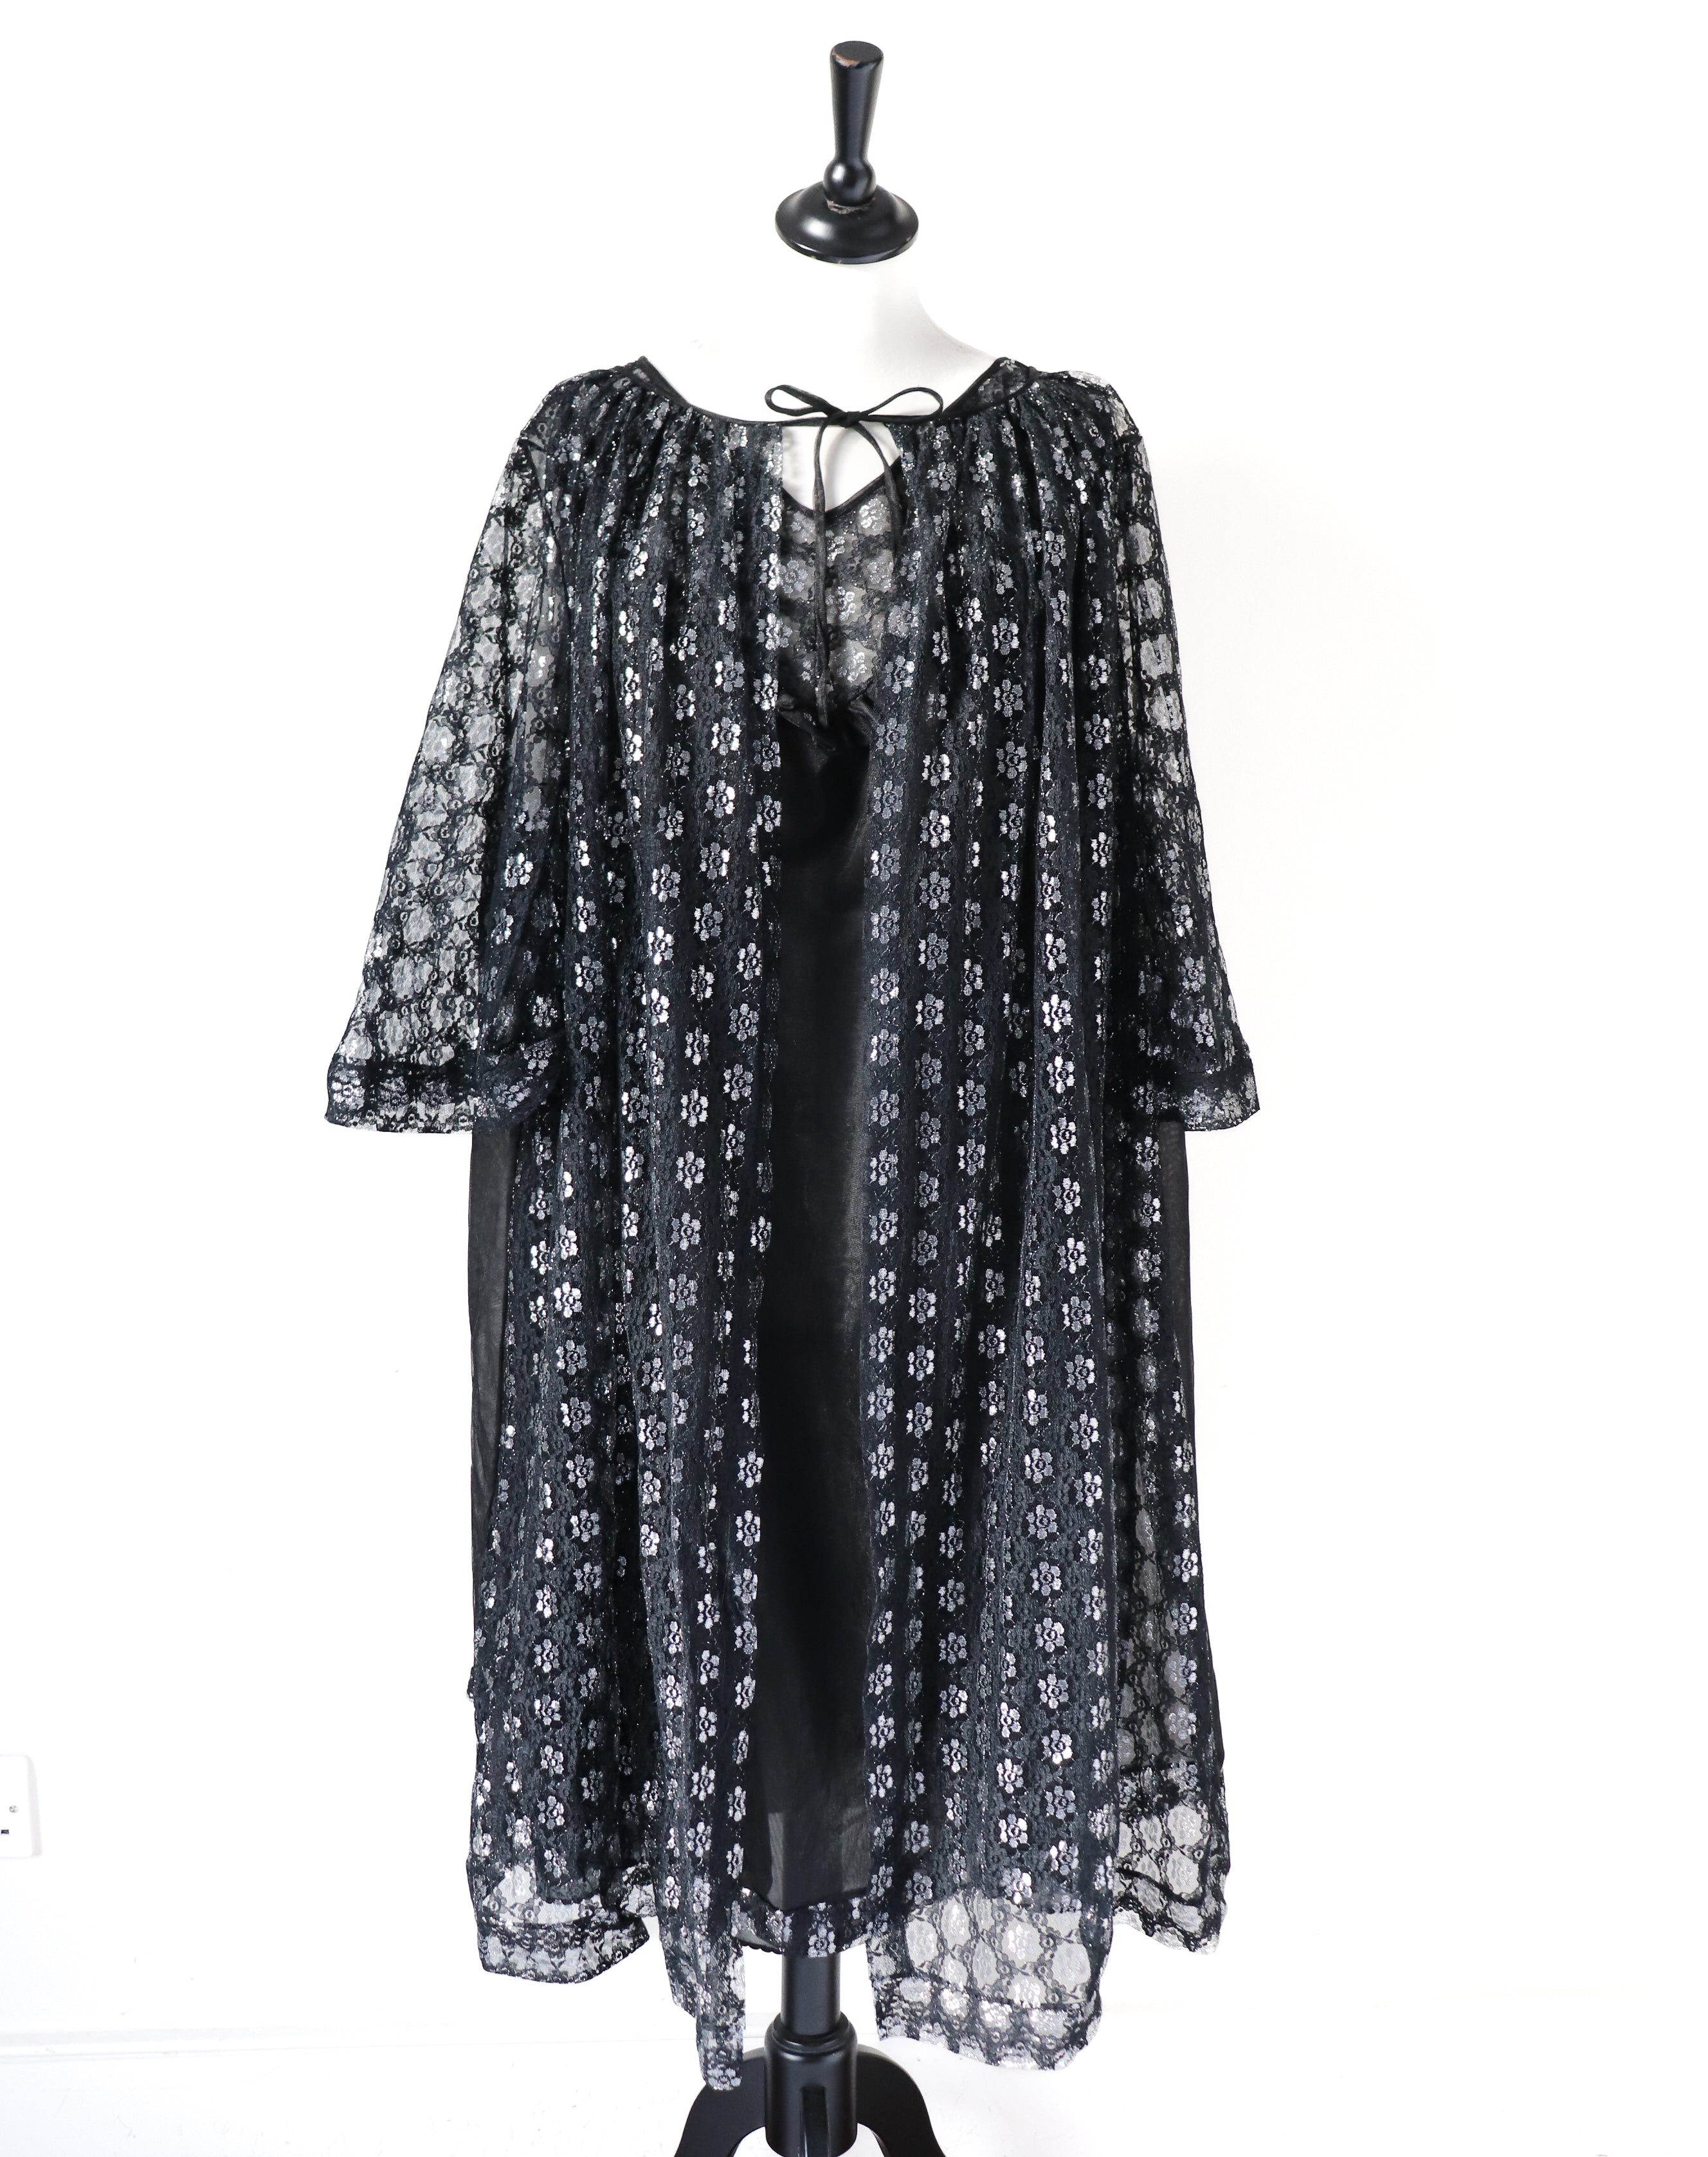 Black / Silver Vintage Evening Gown - 2 Piece 1960s Dress / Coat Negligee